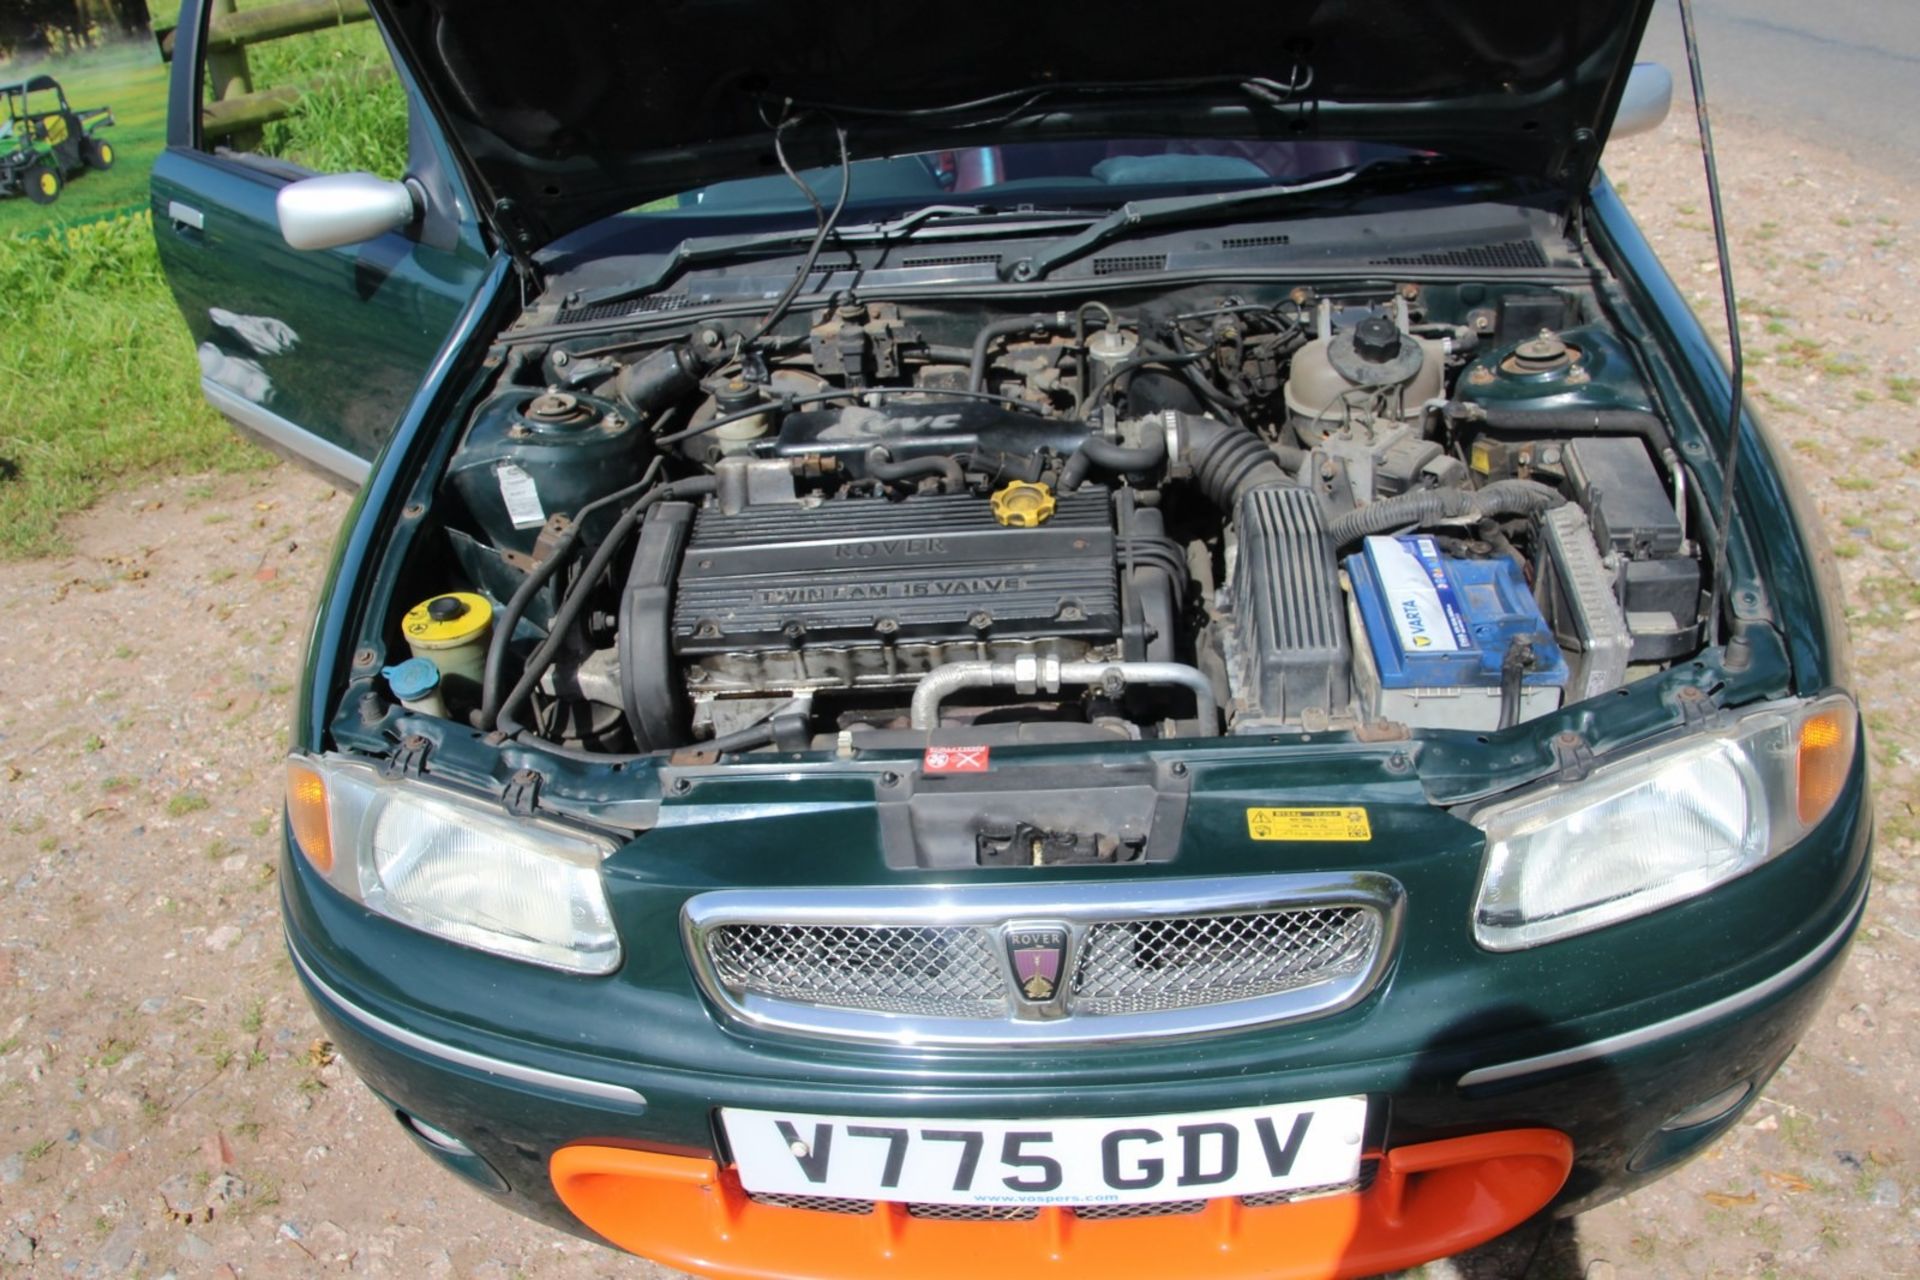 1999 Rover 200 BRM Registration number V775 GDV Brooklands green with a red leather interior One - Image 5 of 12